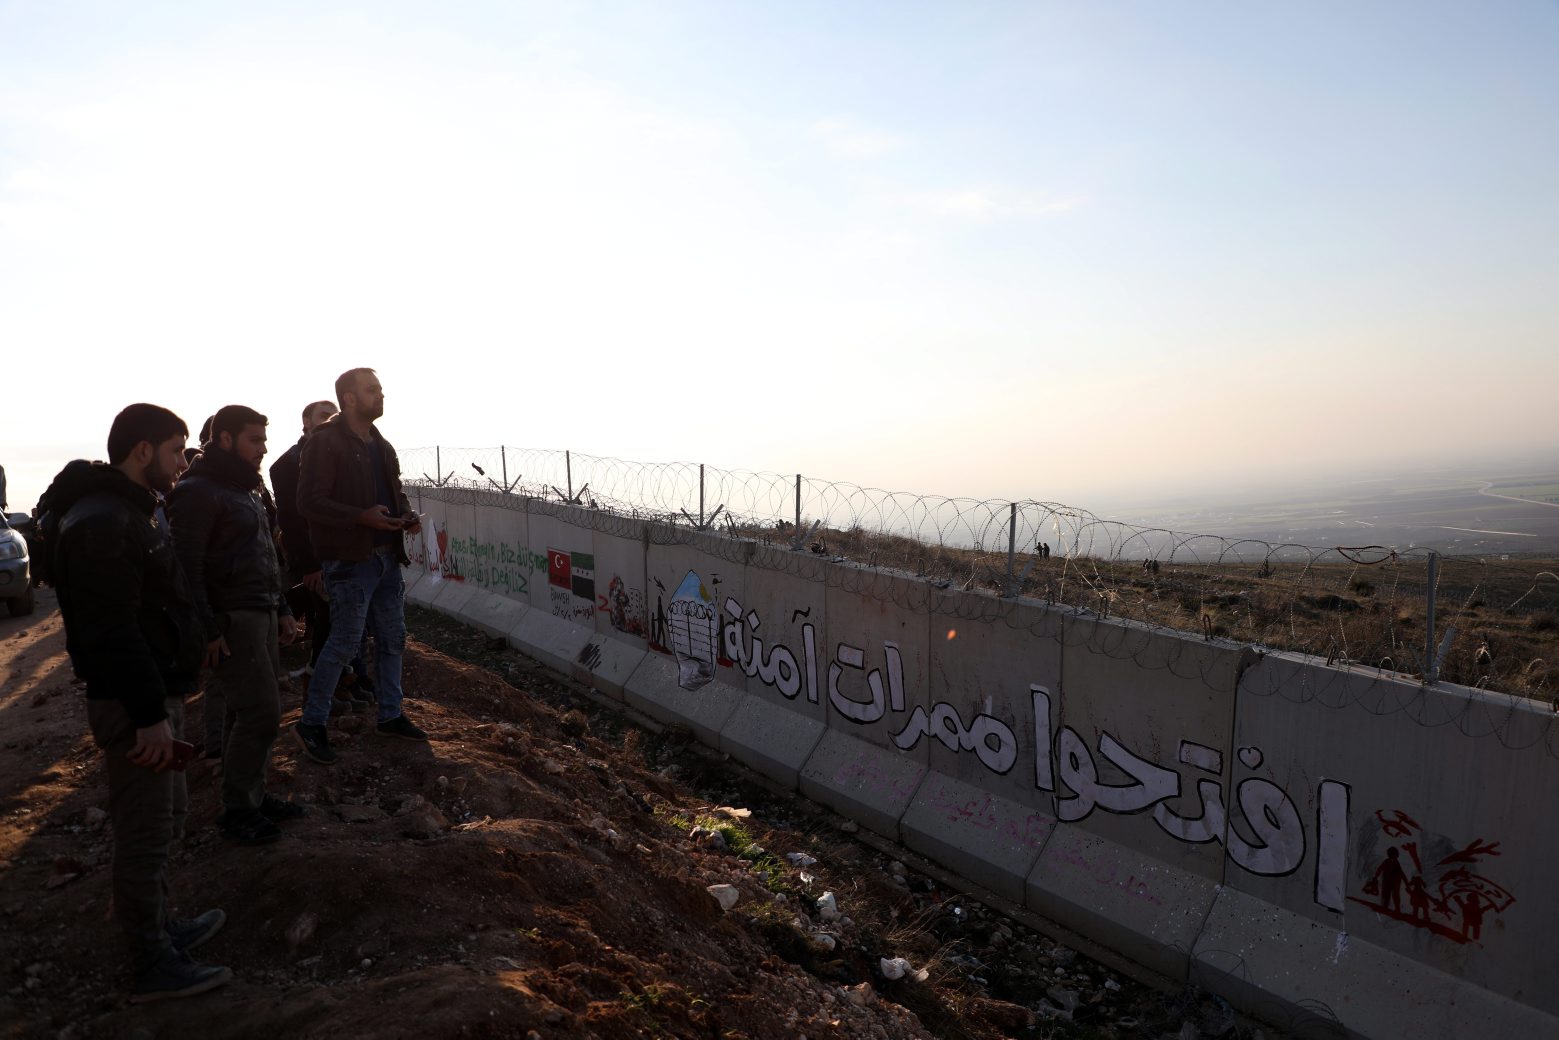 epaselect epa08188241 Syrian people look on as they stand at the Syrian-Turkish border wall with Arabic reading 'open safe passages' during a protest northwestern of Idlib, Syria, 02 February 2020. According to local reports, some 500 people joined the protest titled 'From Idlib to Berlin' organized by several civilian activists in northern Syria to highlight the sufferings of Idlib residents after the Syrian regime launched operation and escalated airstrikes on the area. According to one of the organizers, the protesting people are calling on Turkey to open safe passages so that civilians can cross to European countries, namely Germany which had previously received Syrian refugees.  EPA/YAHYA NEMAH epaselect SYRIA IDLIB PROTEST